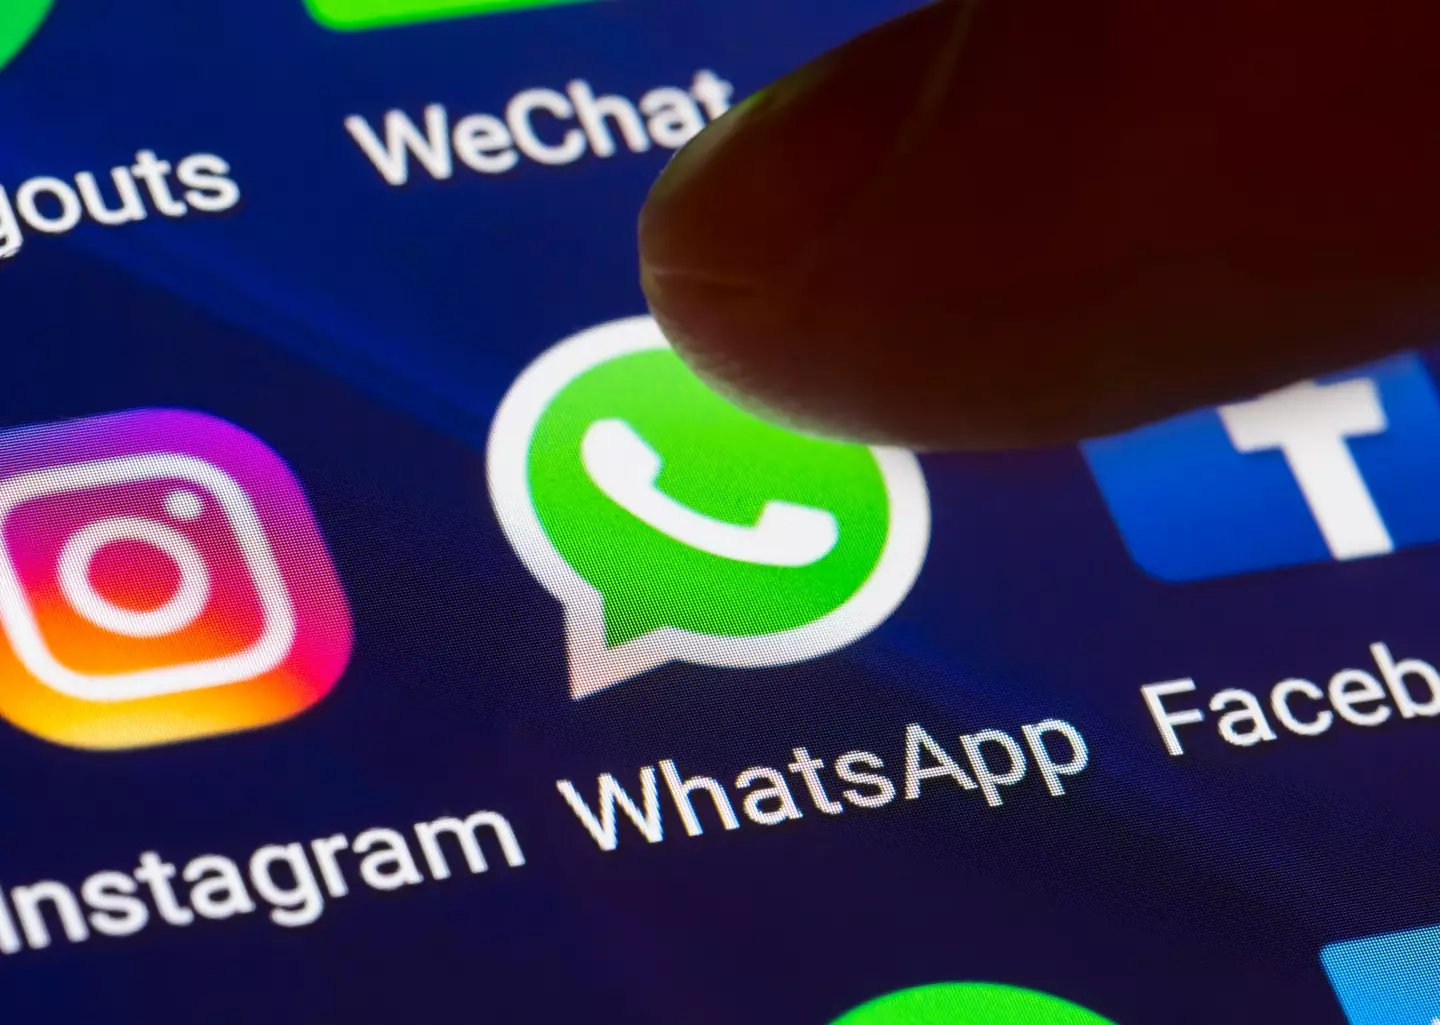 WhatsApp users have been warned about a scam doing the rounds.